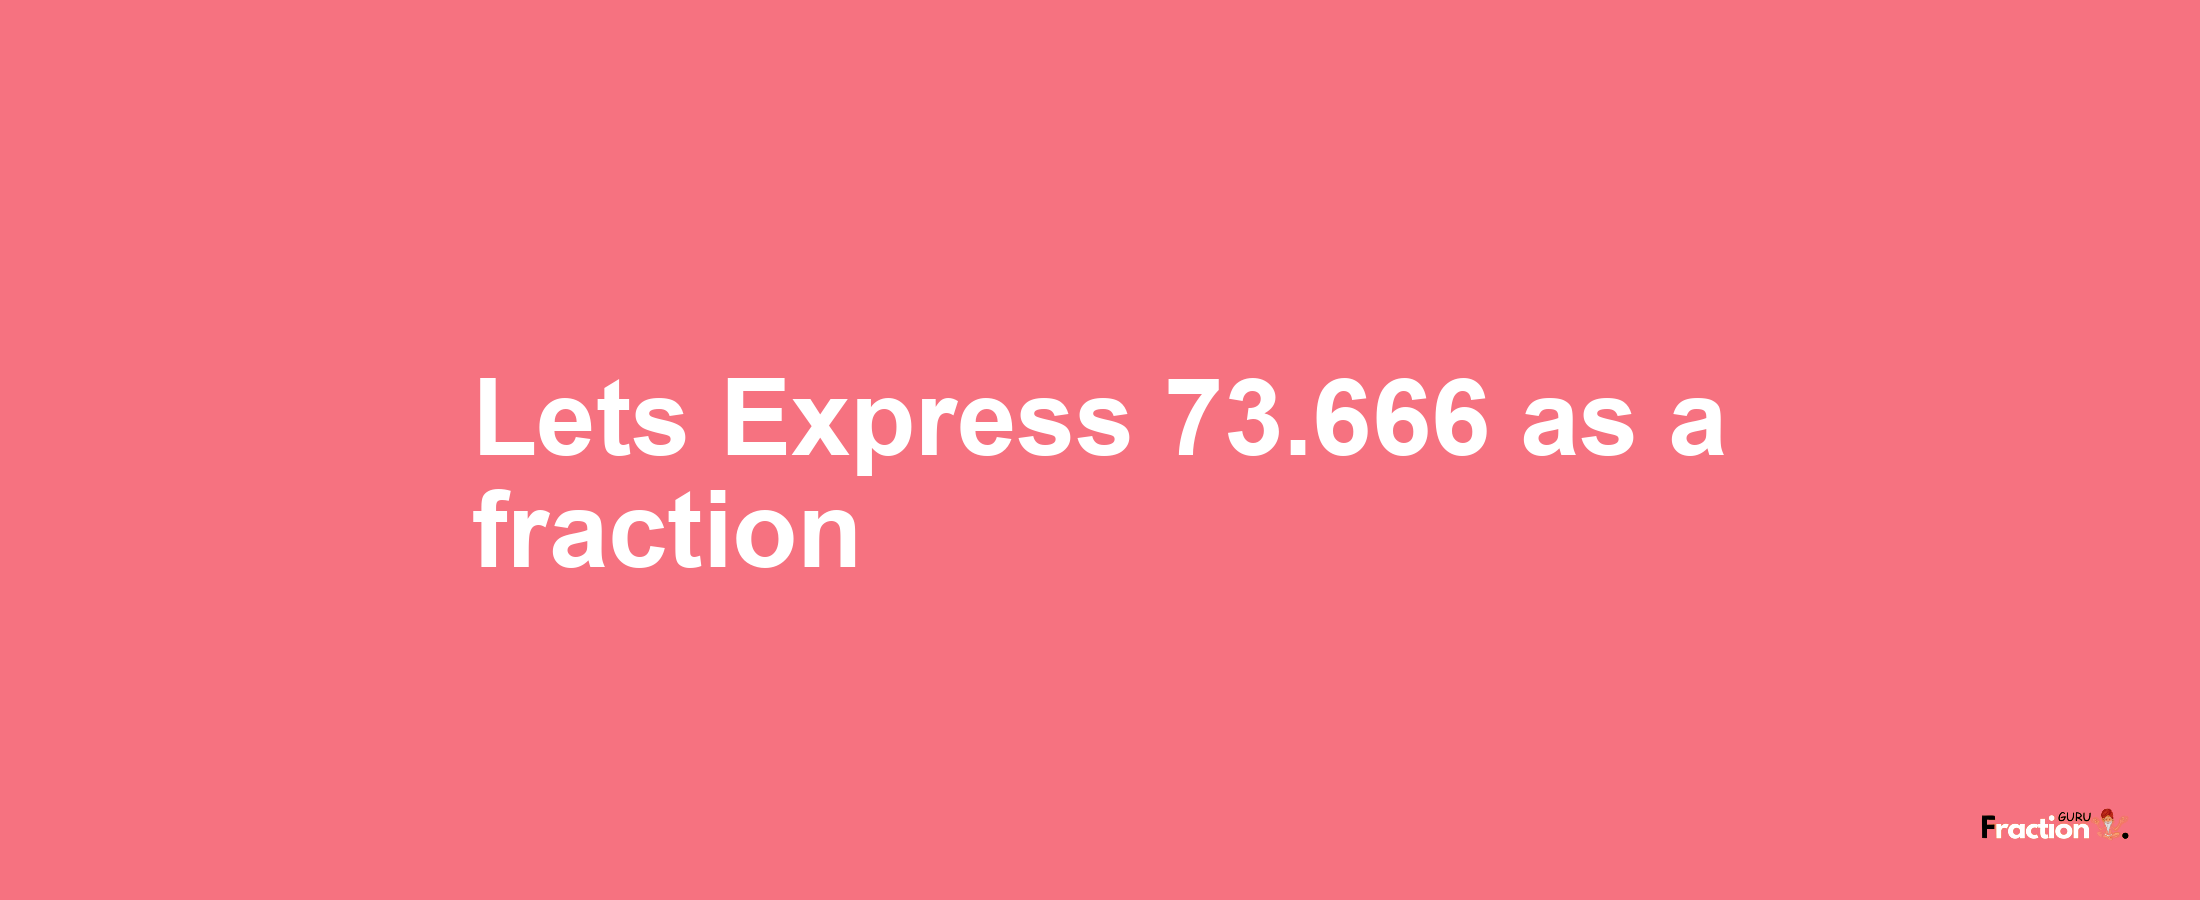 Lets Express 73.666 as afraction